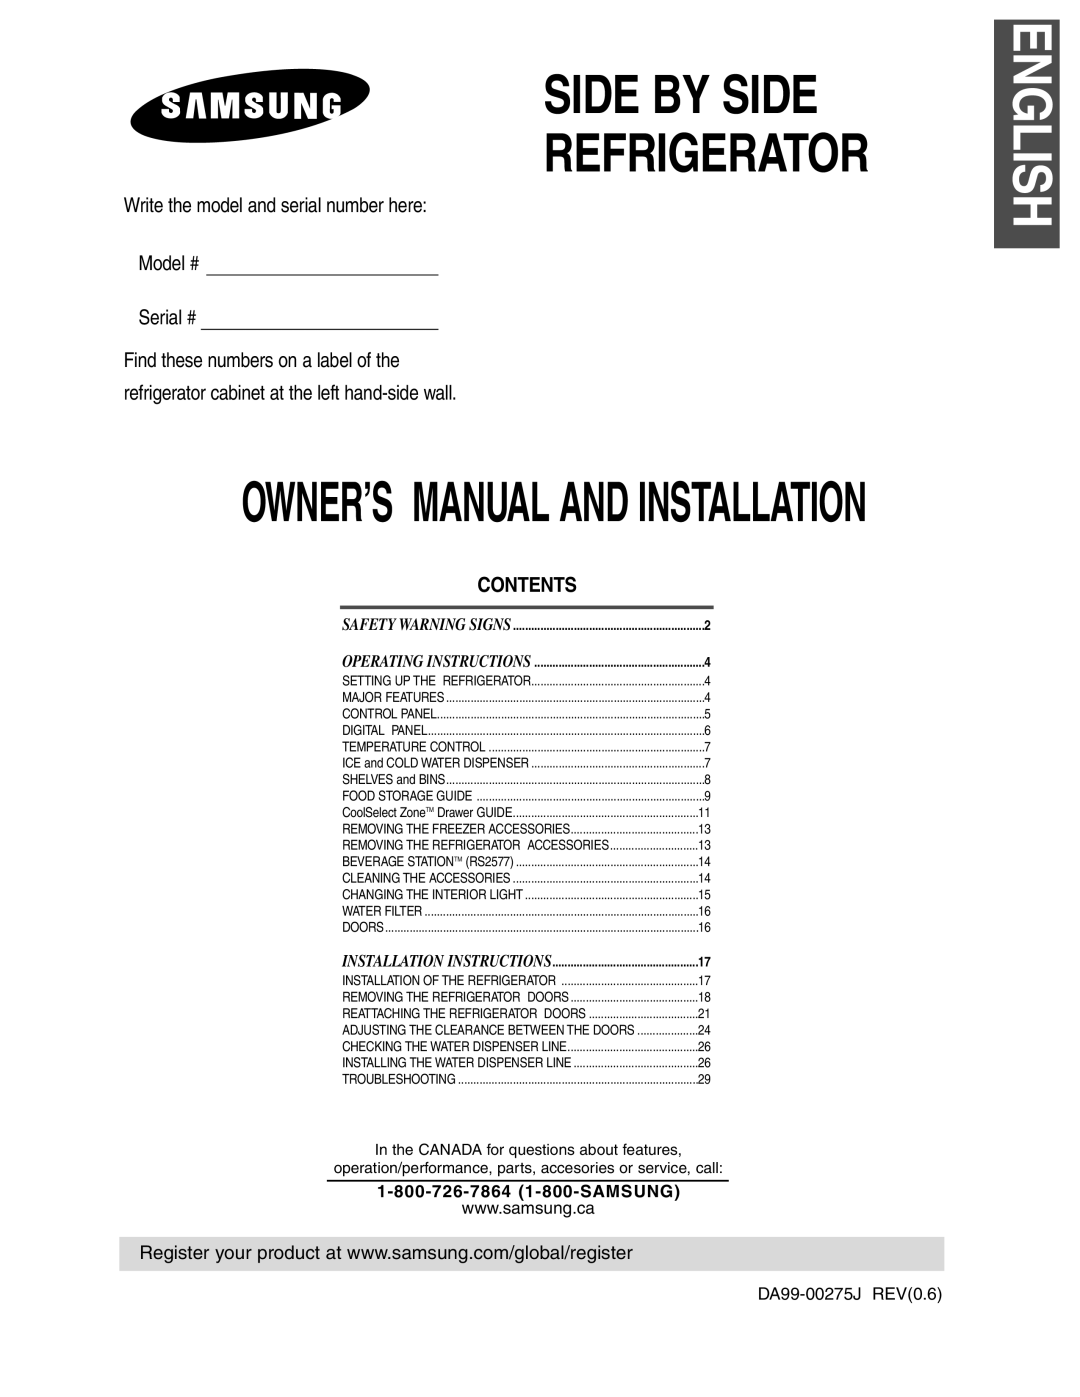 Samsung RS2533 owner manual Write the model and serial number here Model # Serial #, Contents, Side By Side Refrigerator 